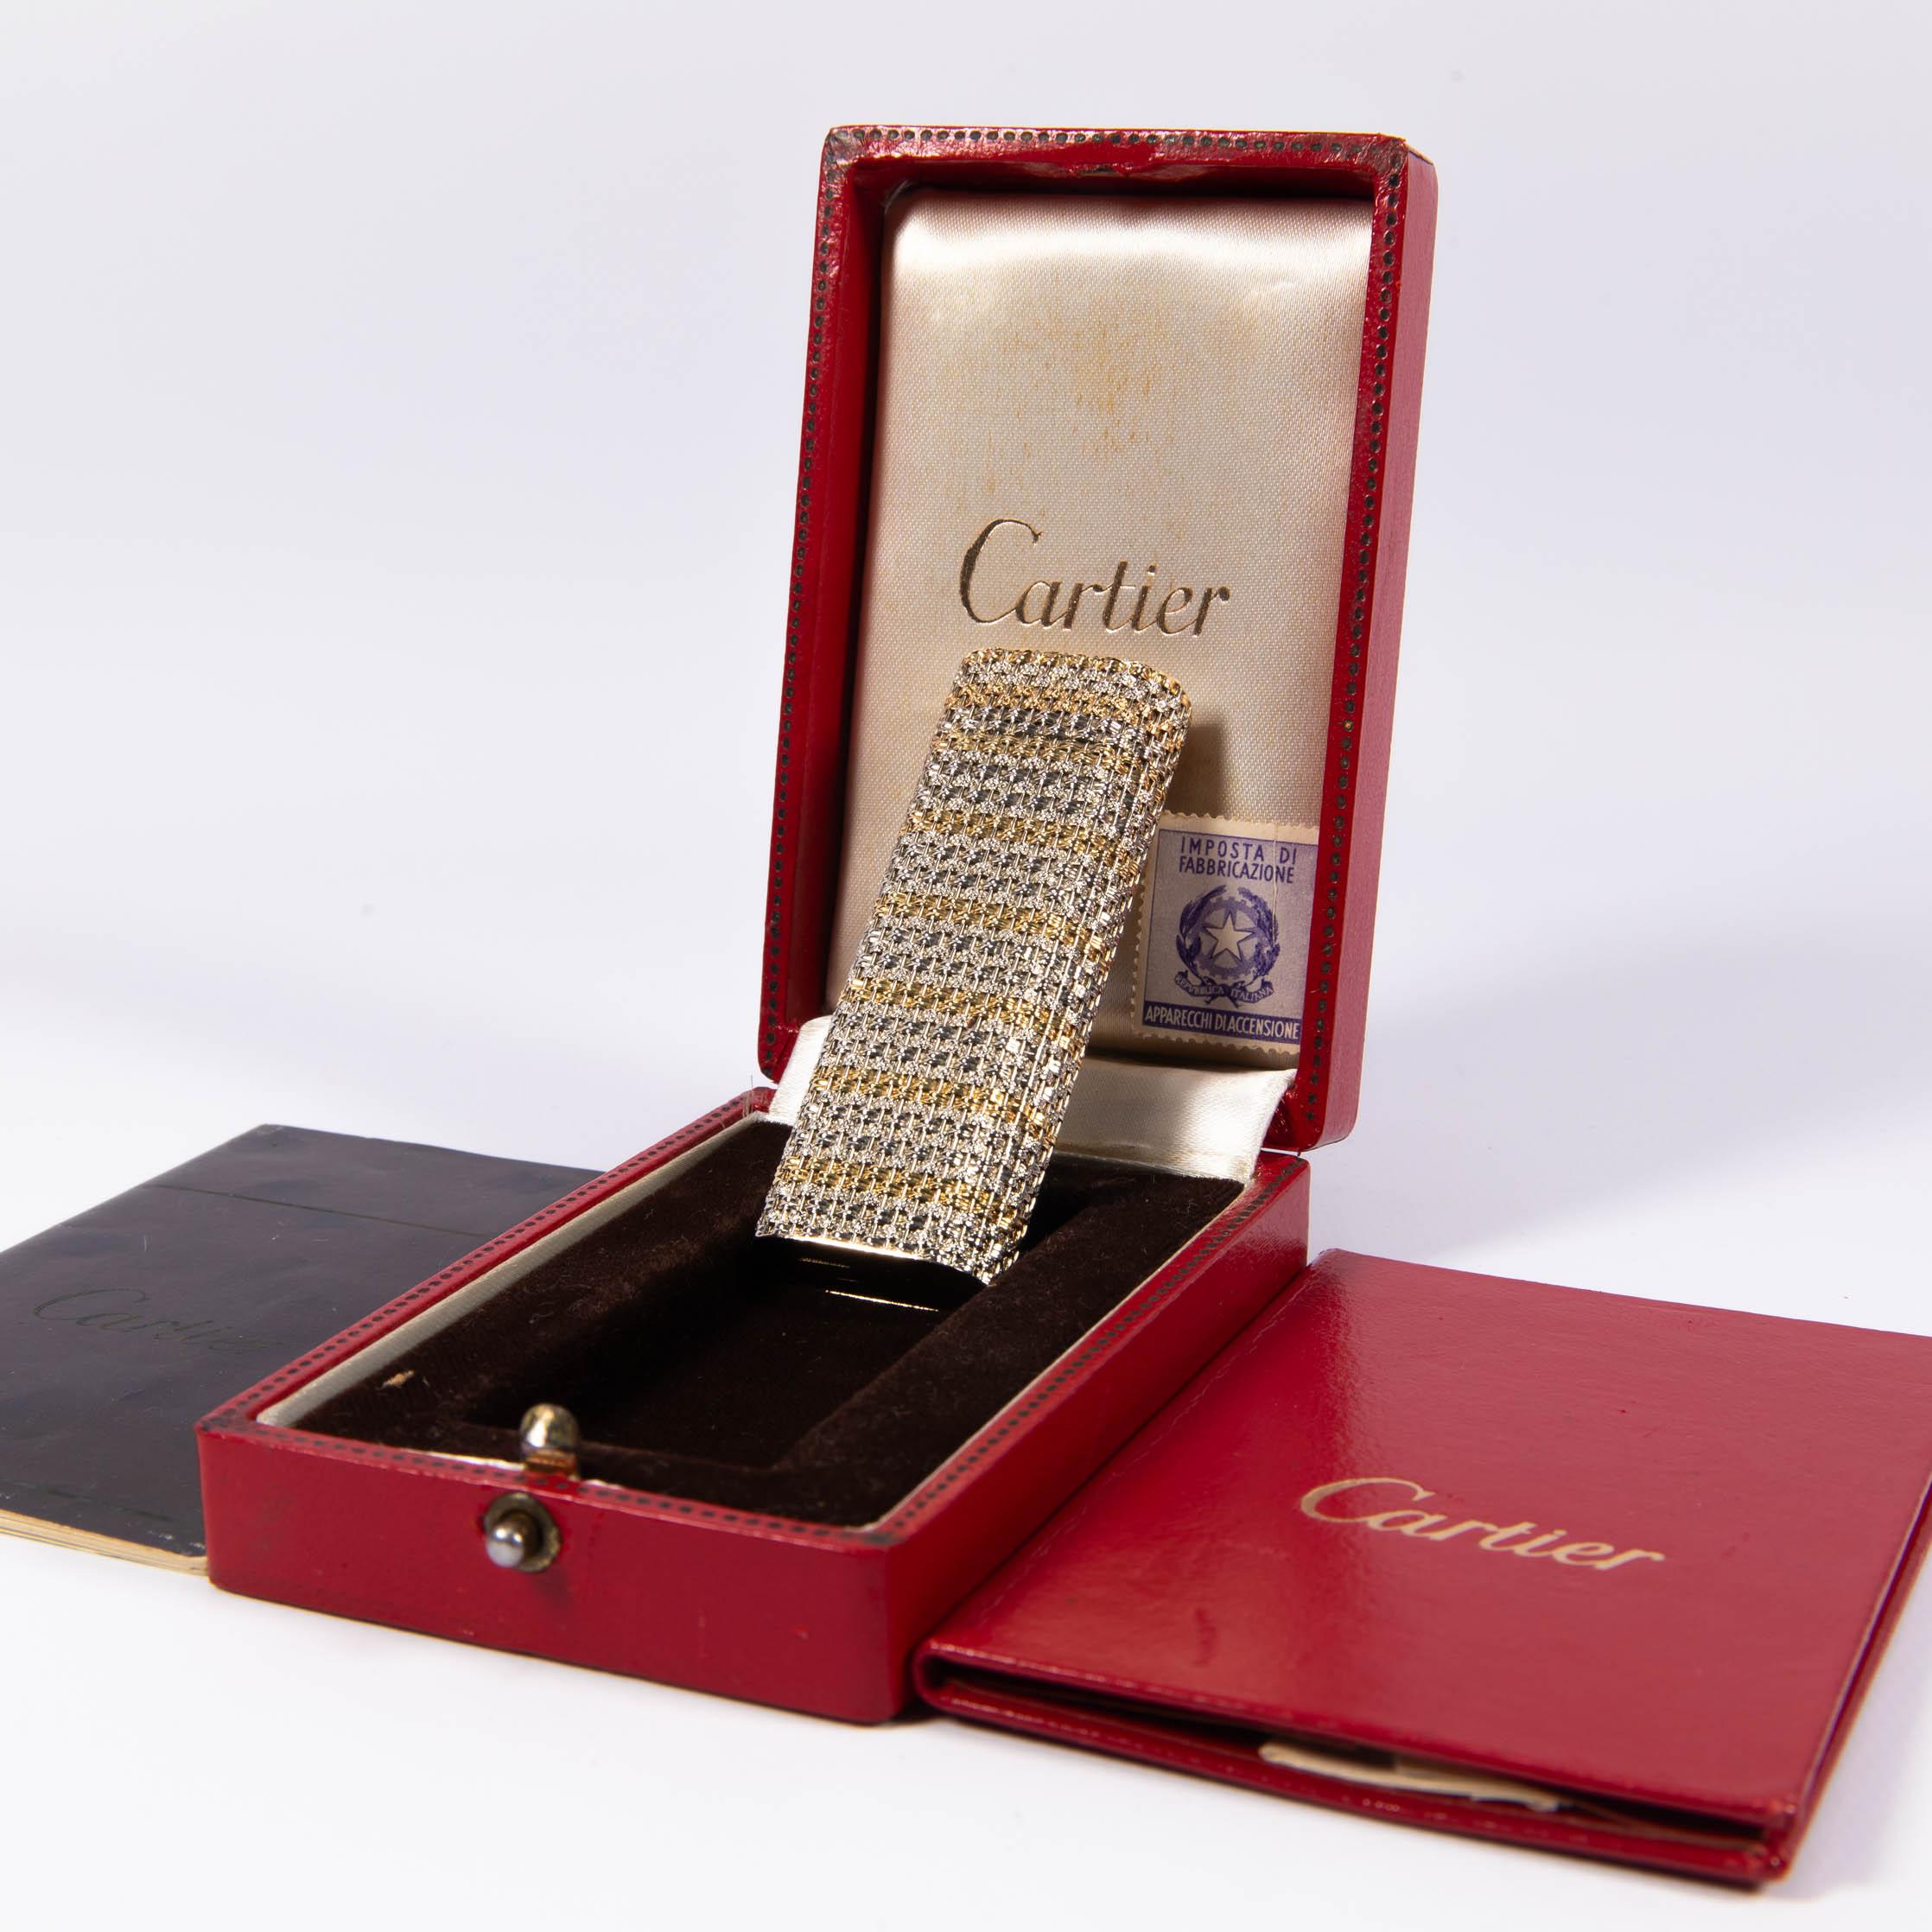 Vintage 18K Solid Gold Sleeved Cartier Les Must lighter

This absolute masterpiece of a lighter is an 18-karat solid gold-sleeved Cartier Les must lighter. It is fully functional, sparks excellent, and does not leak. The lighter is in a rare